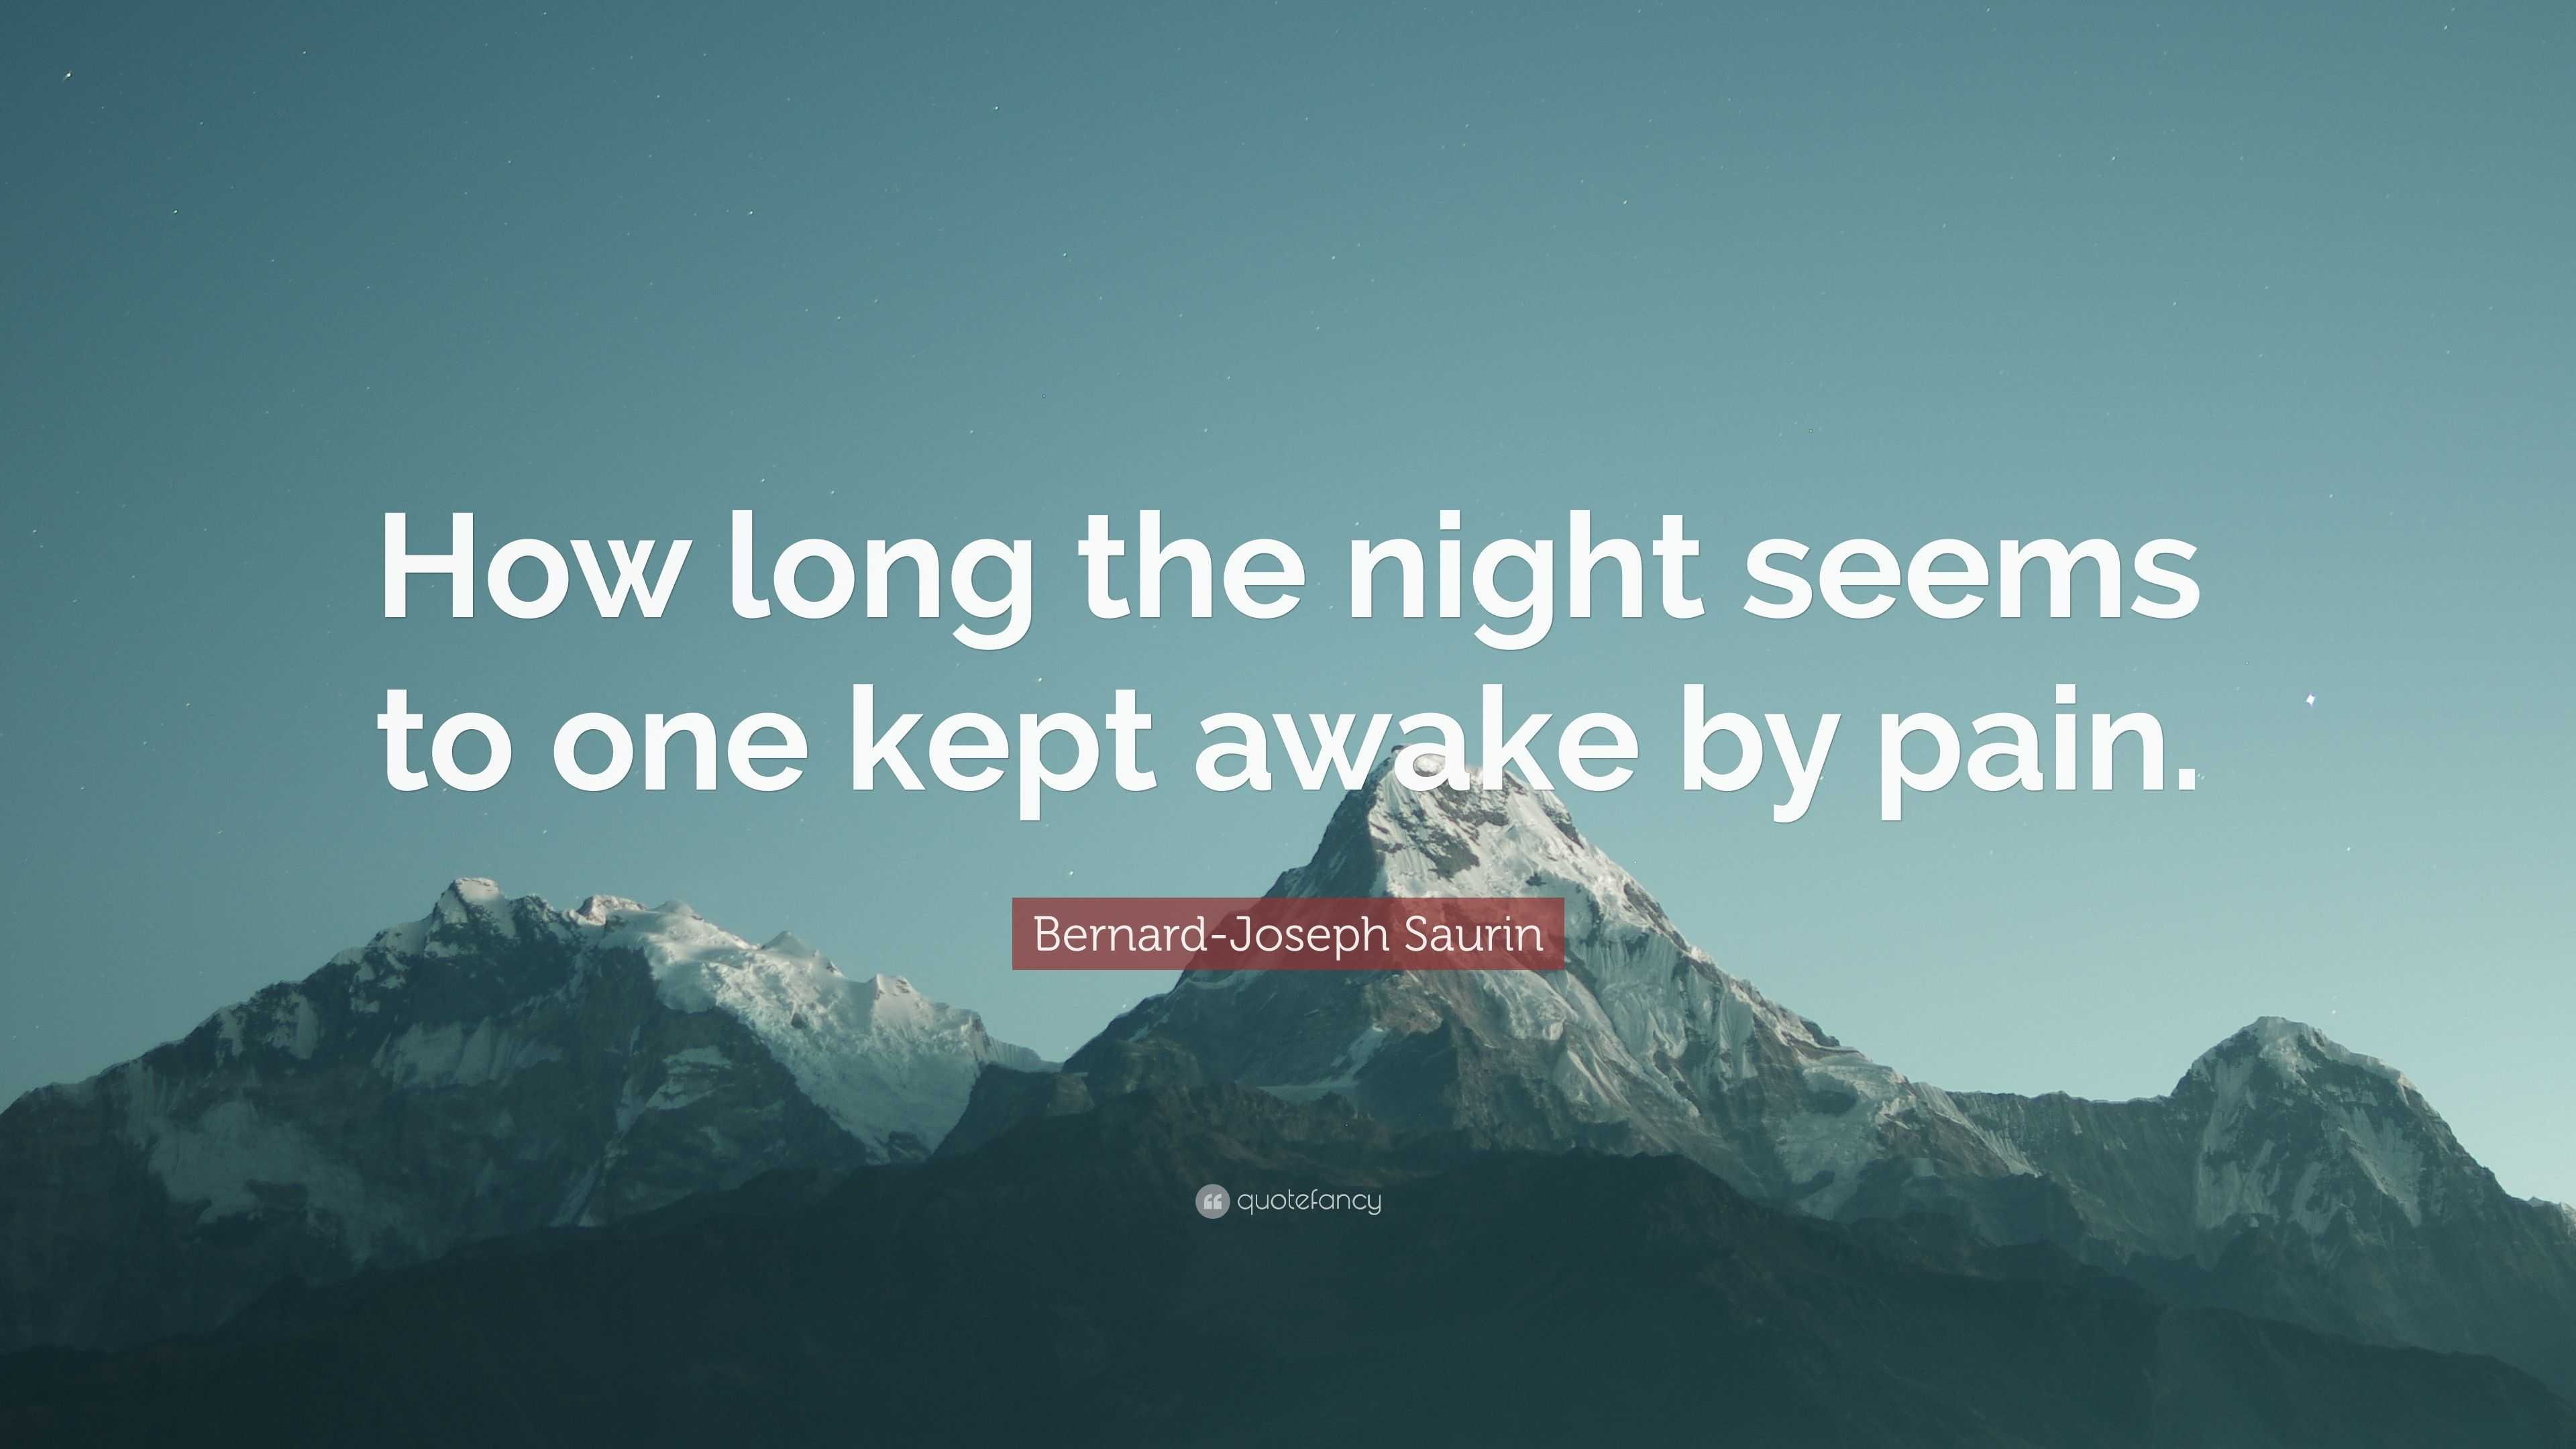 Bernard-Joseph Saurin Quote: “How long the night seems to one kept